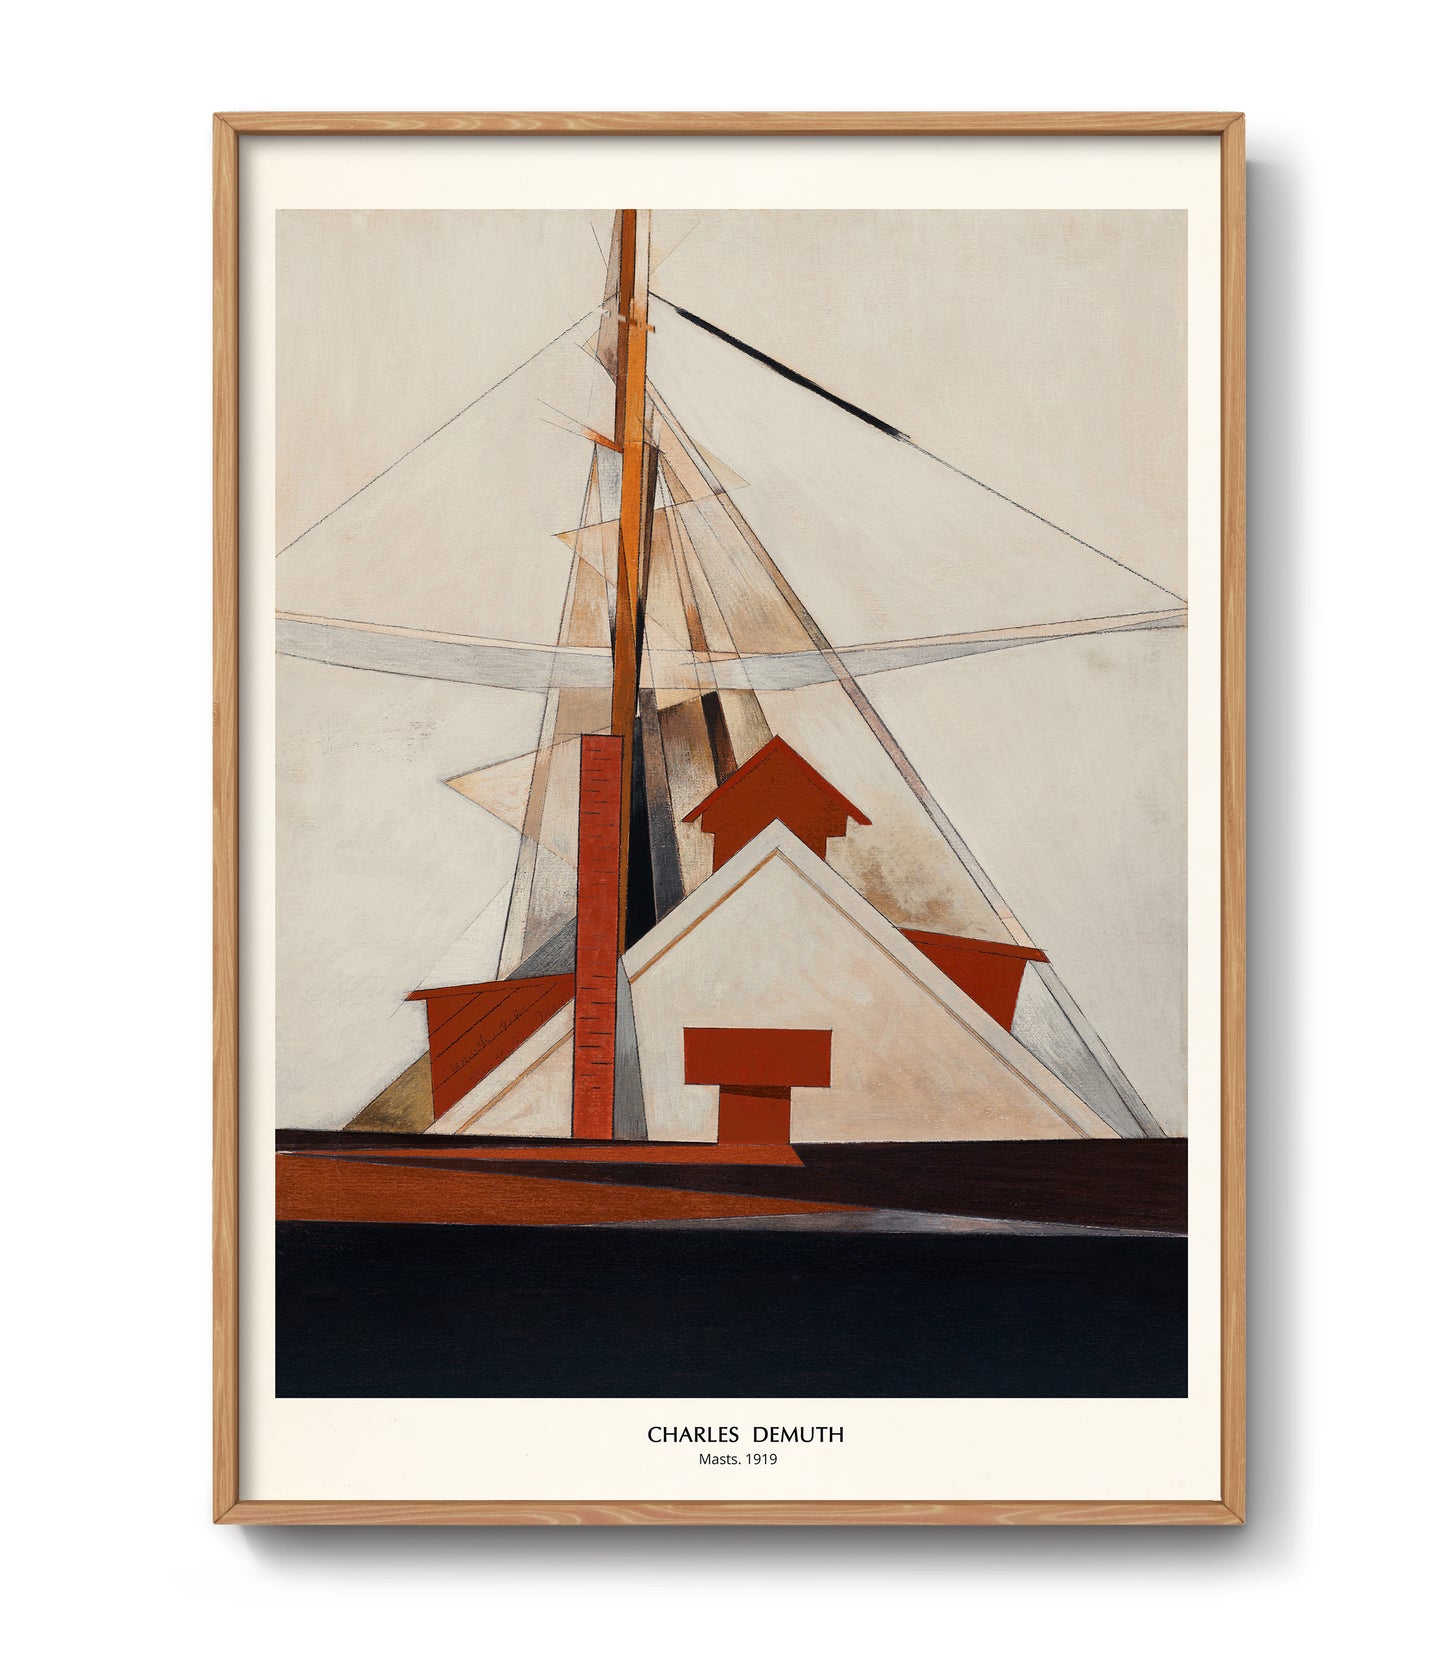 Masts by Charles Demuth, 1919